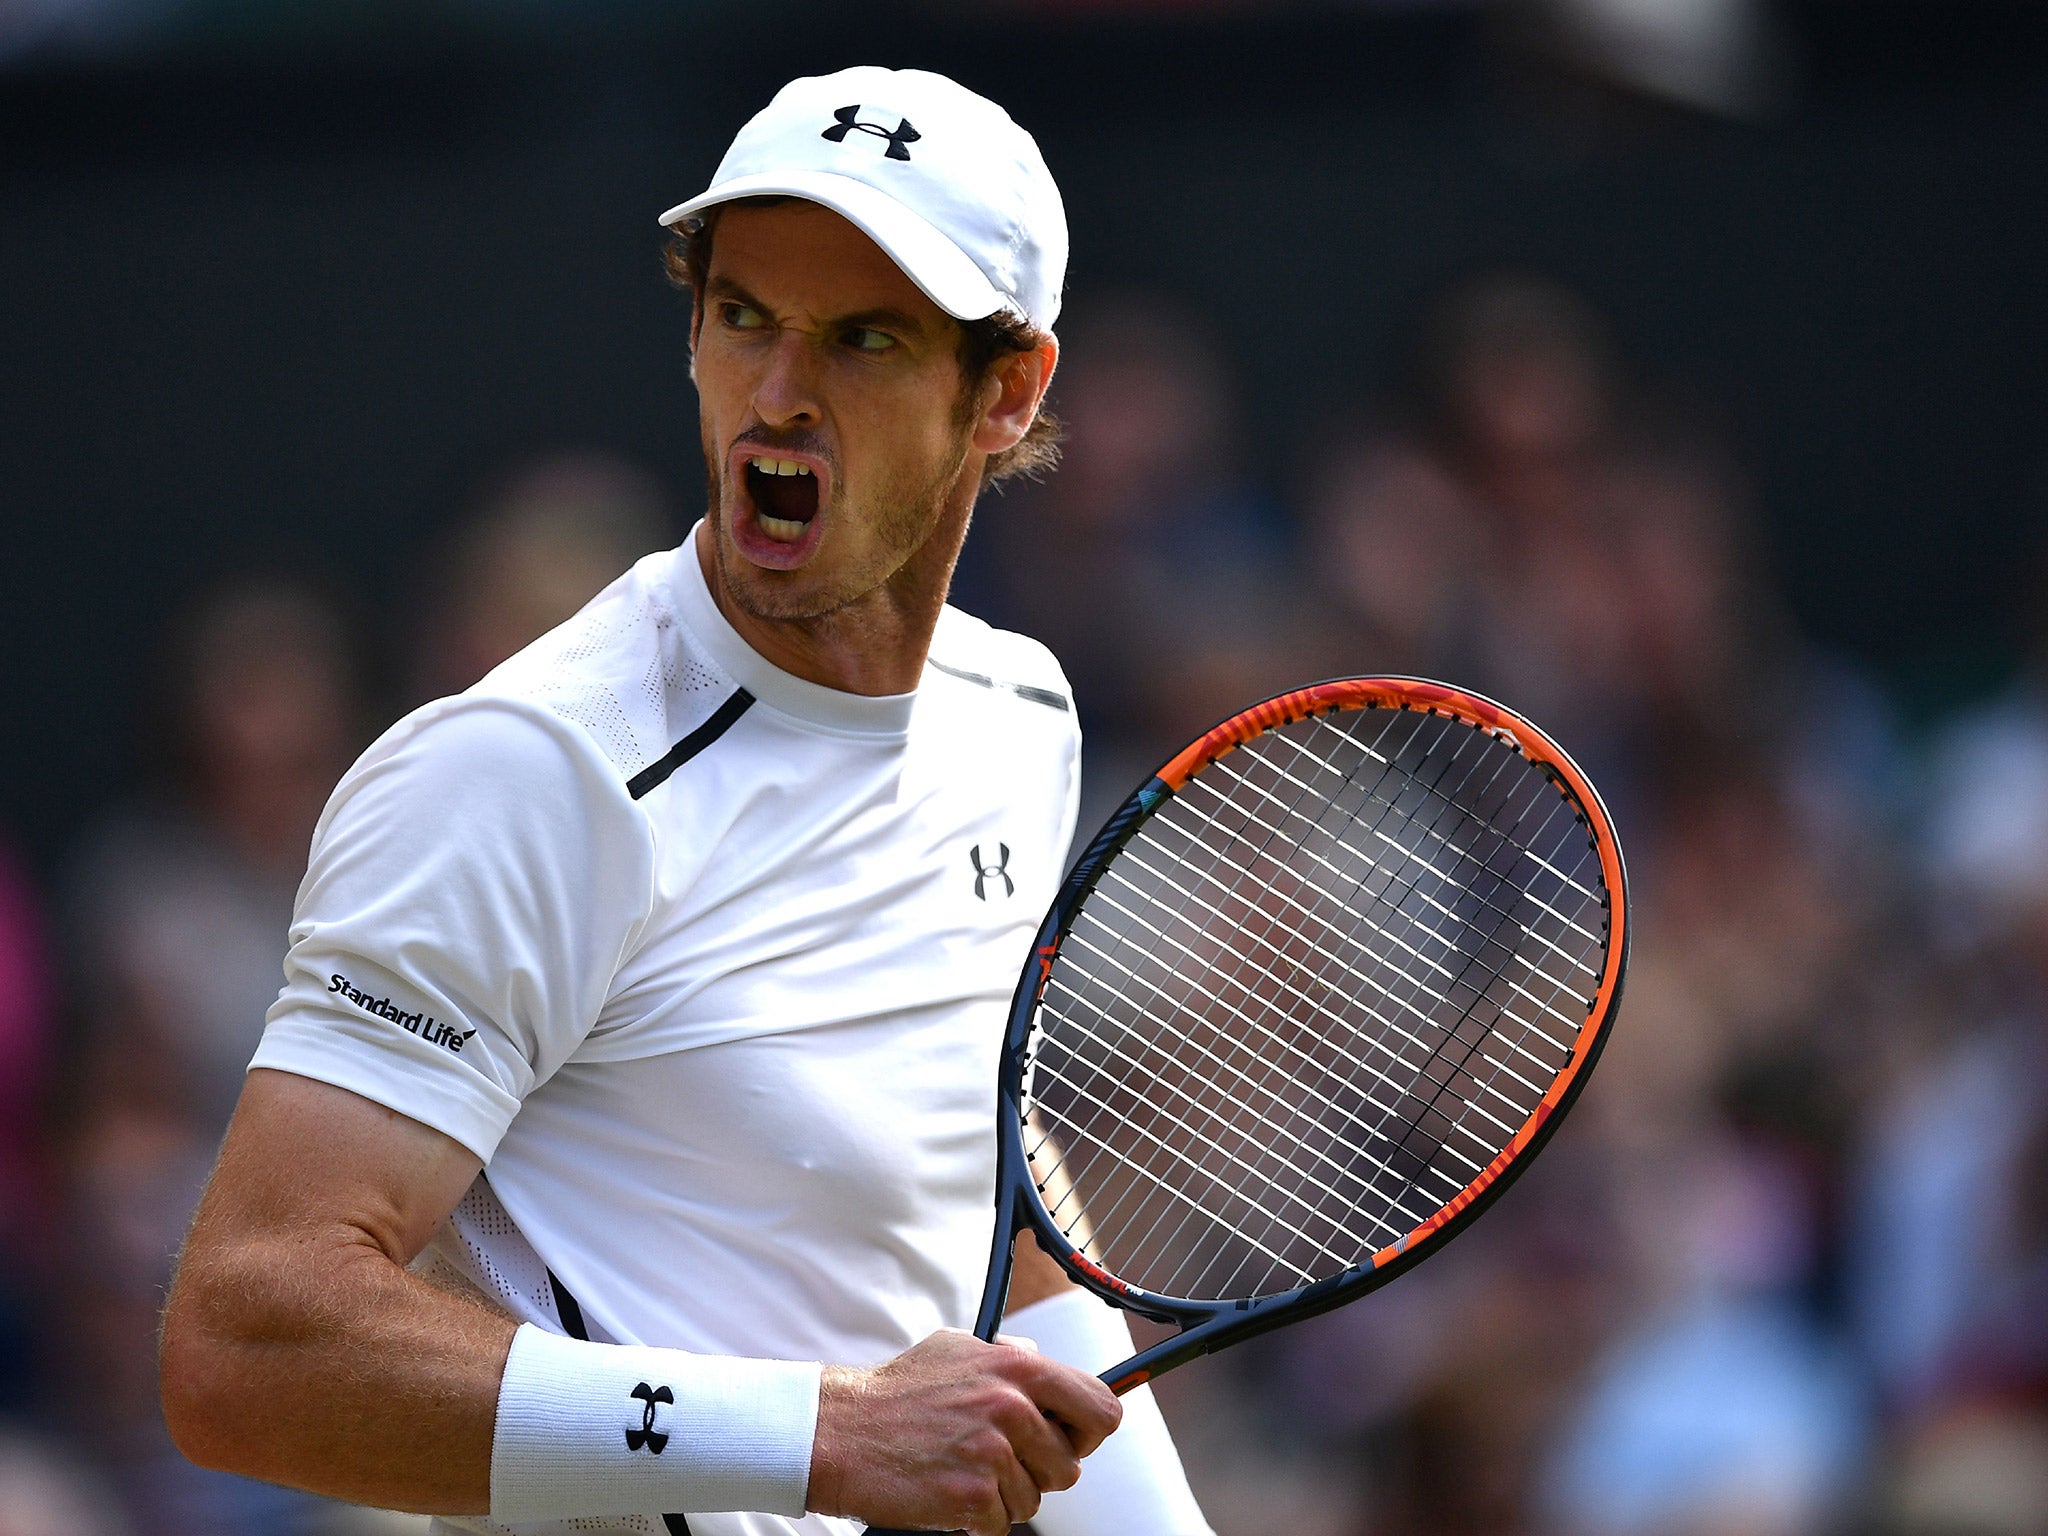 Andy Murray celebrates taking the first set against Tomas Berdych